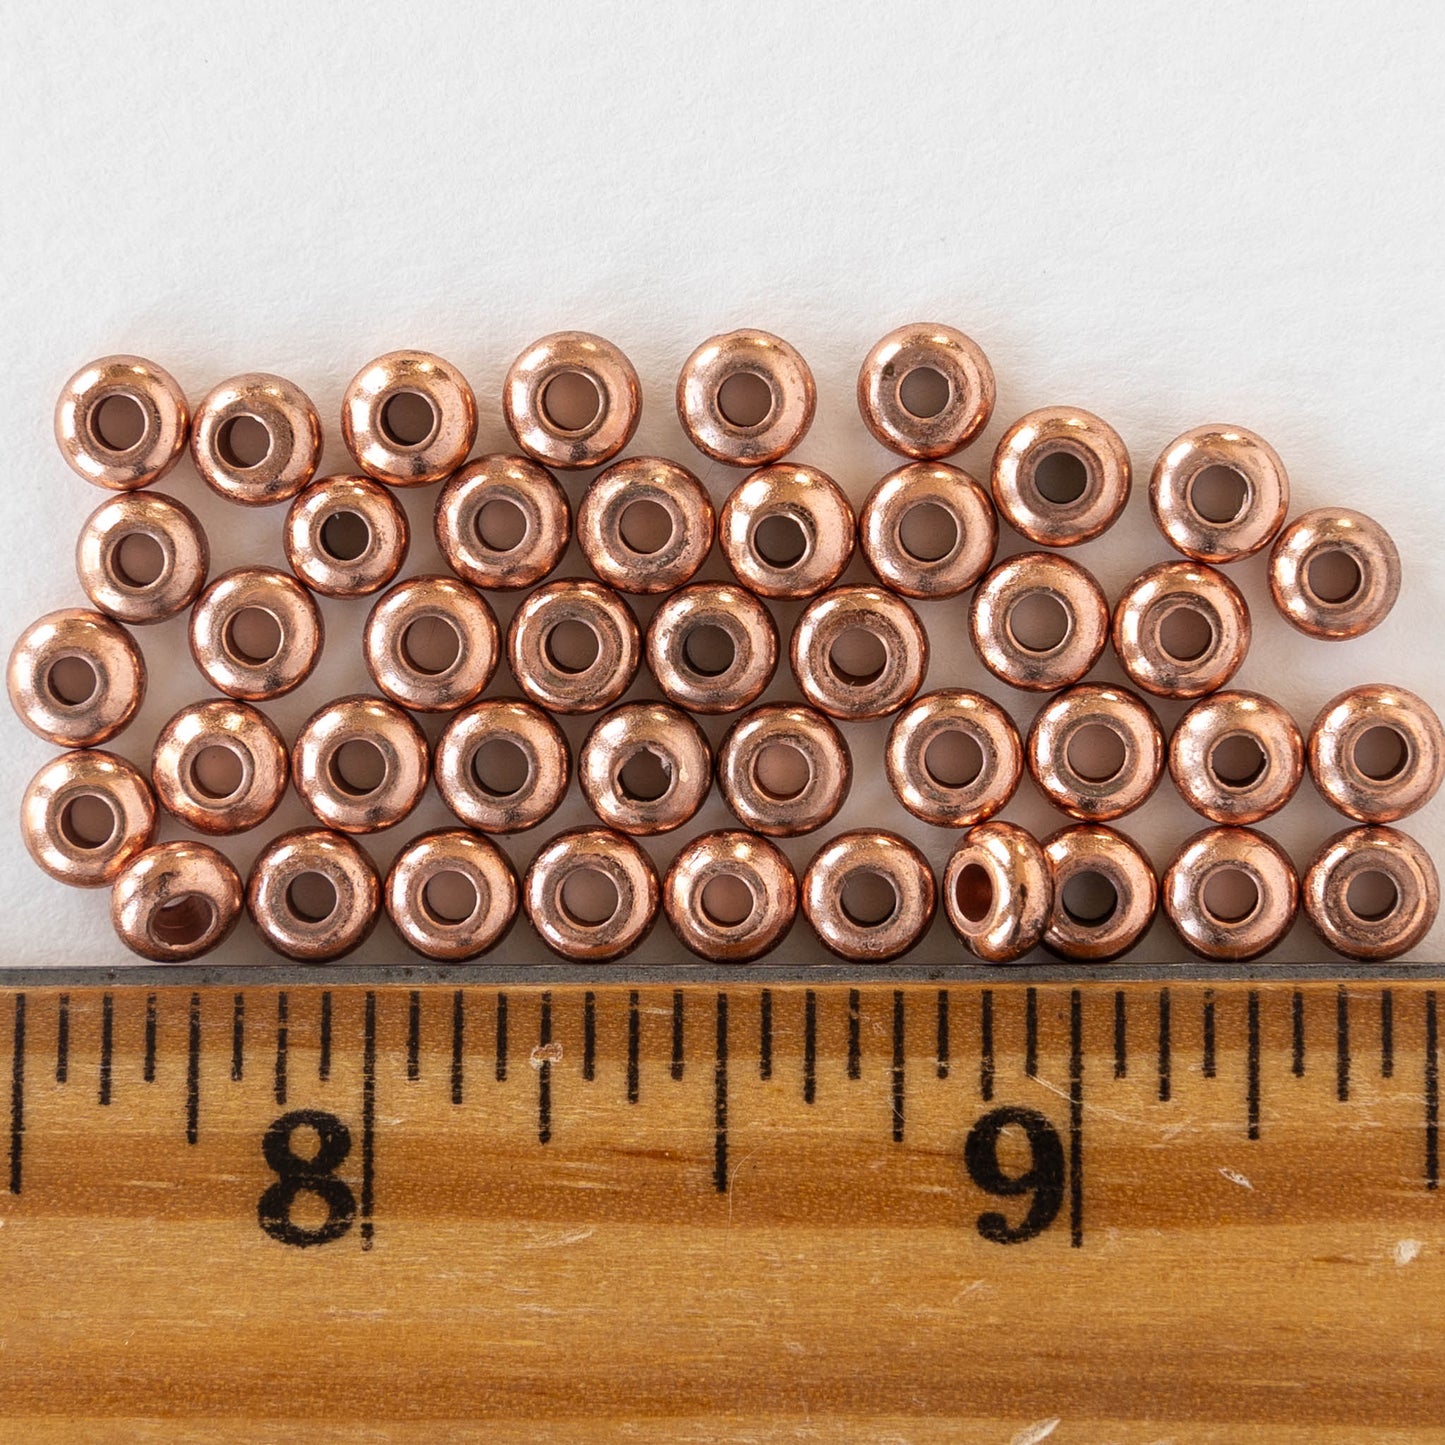 5mm Copper Rondelle Beads - 40